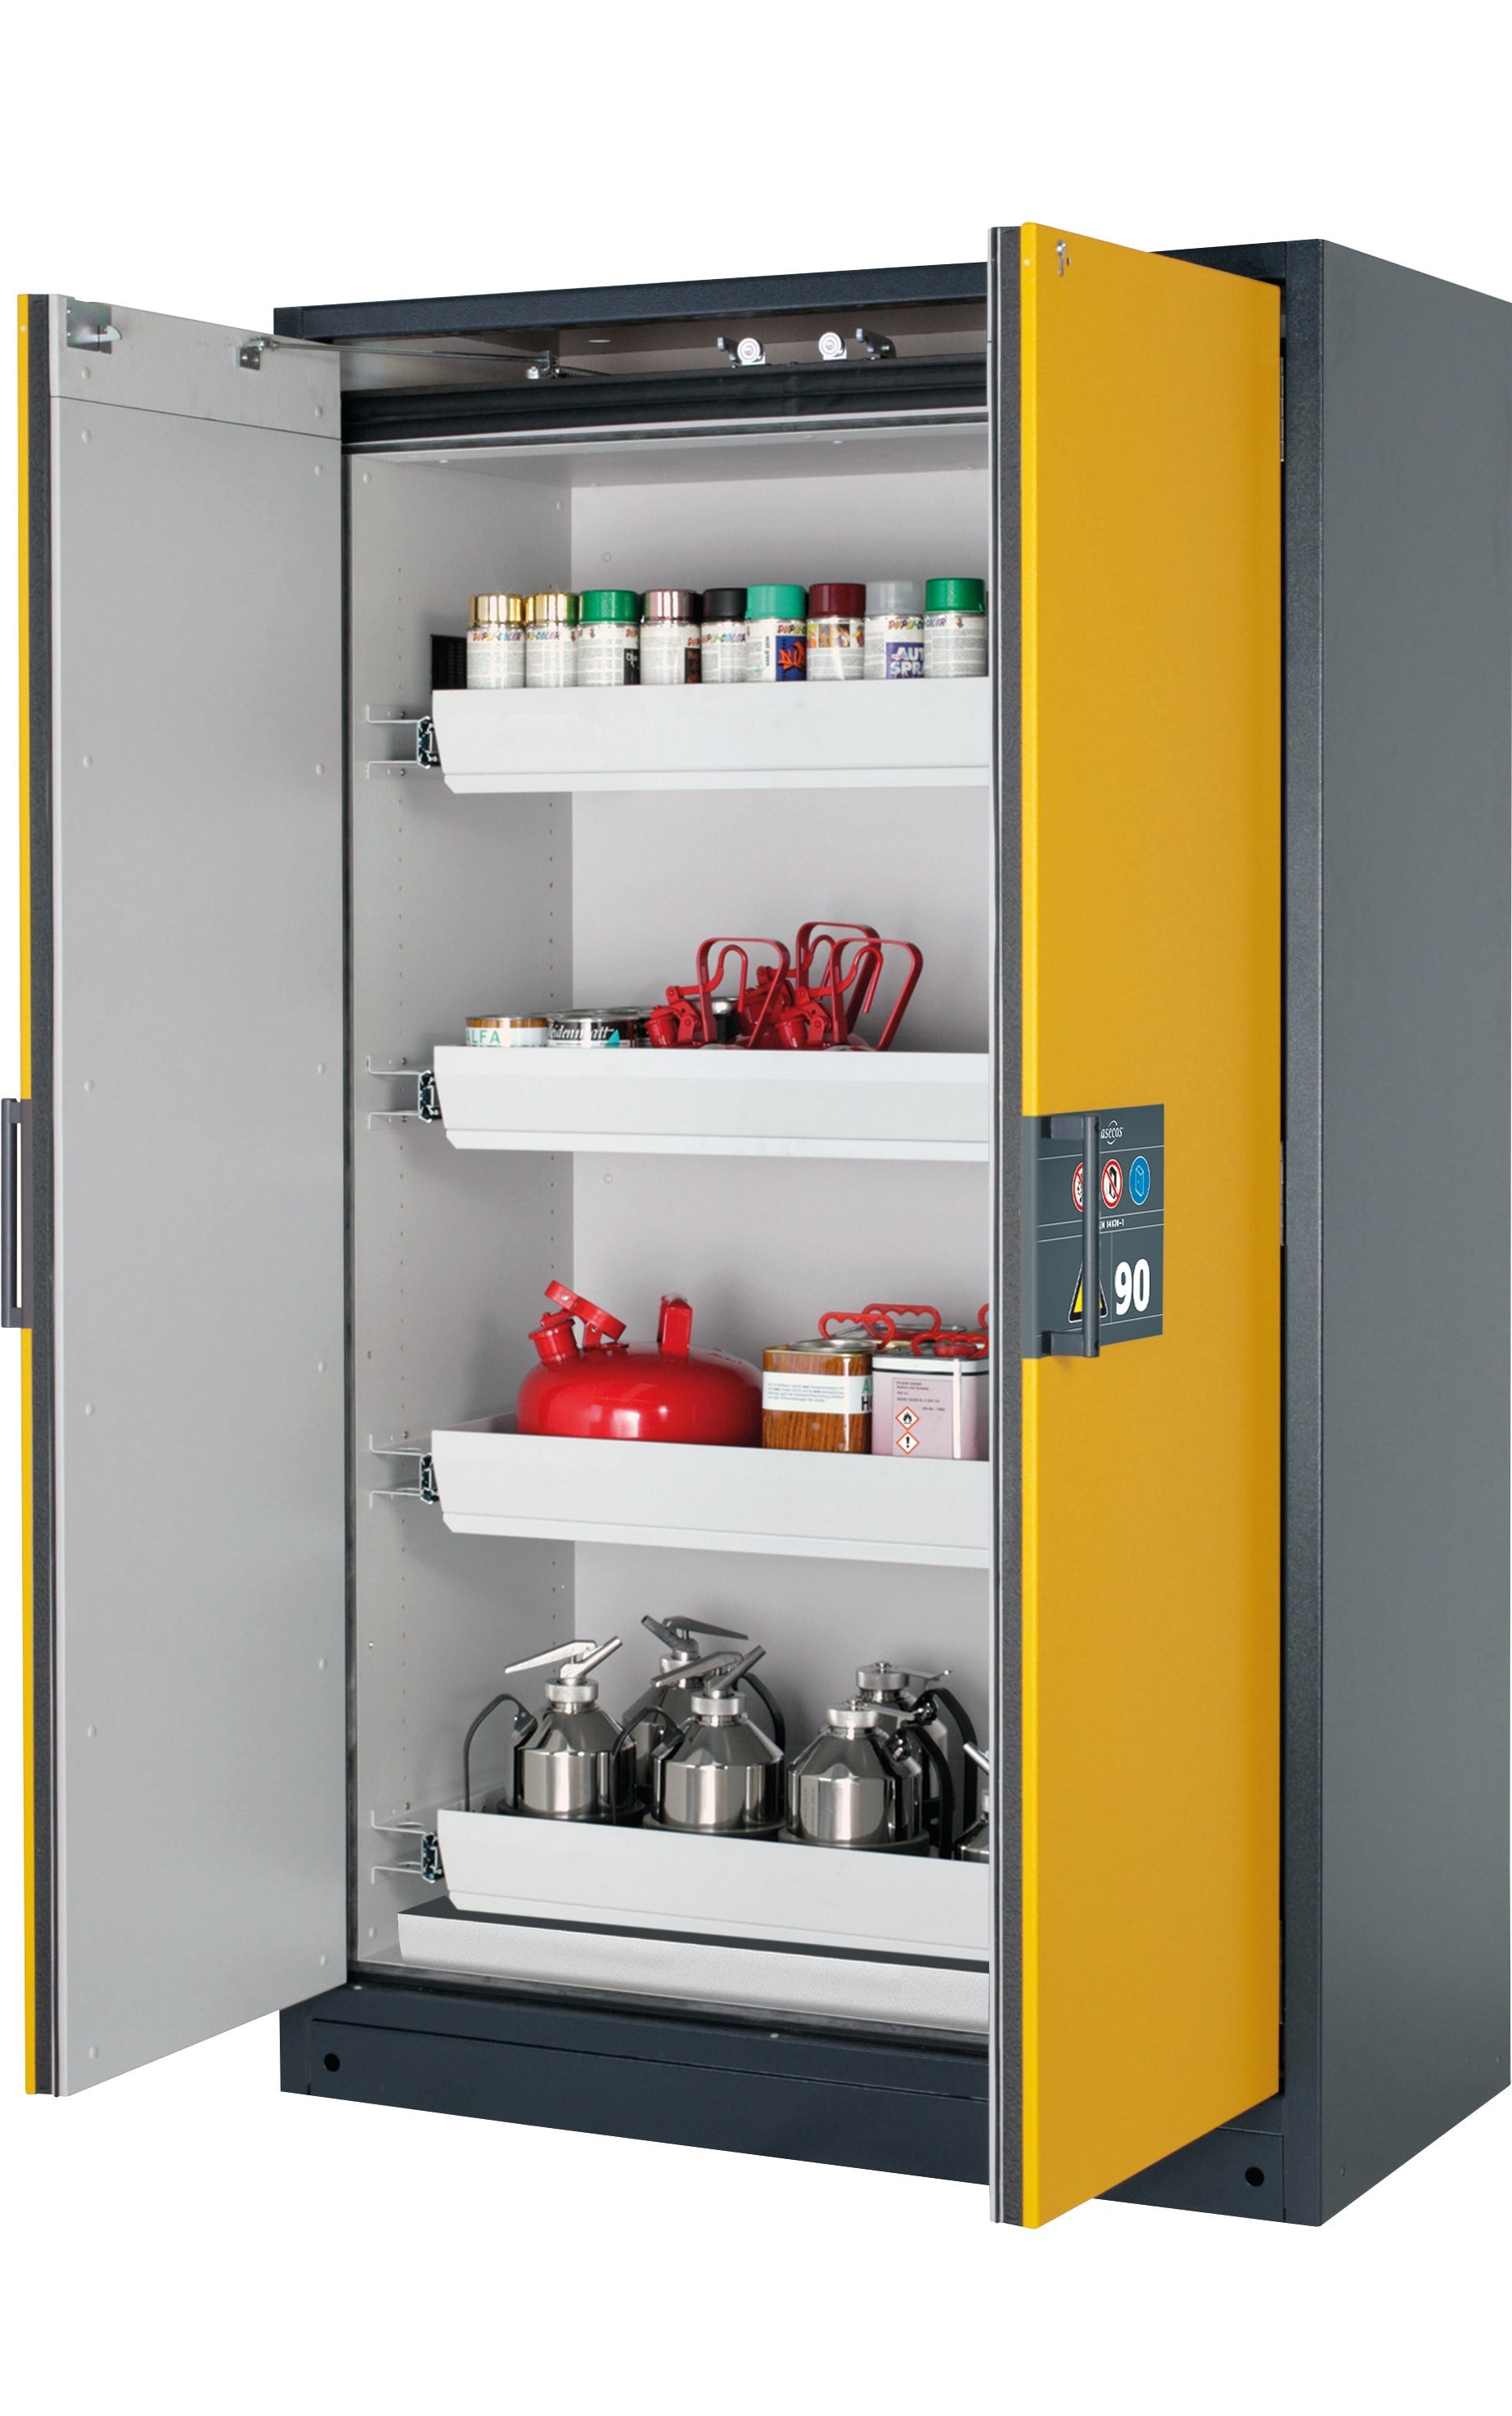 Type 90 safety storage cabinet Q-CLASSIC-90 model Q90.195.120 in warning yellow RAL 1004 with 4x drawer (standard) (sheet steel),